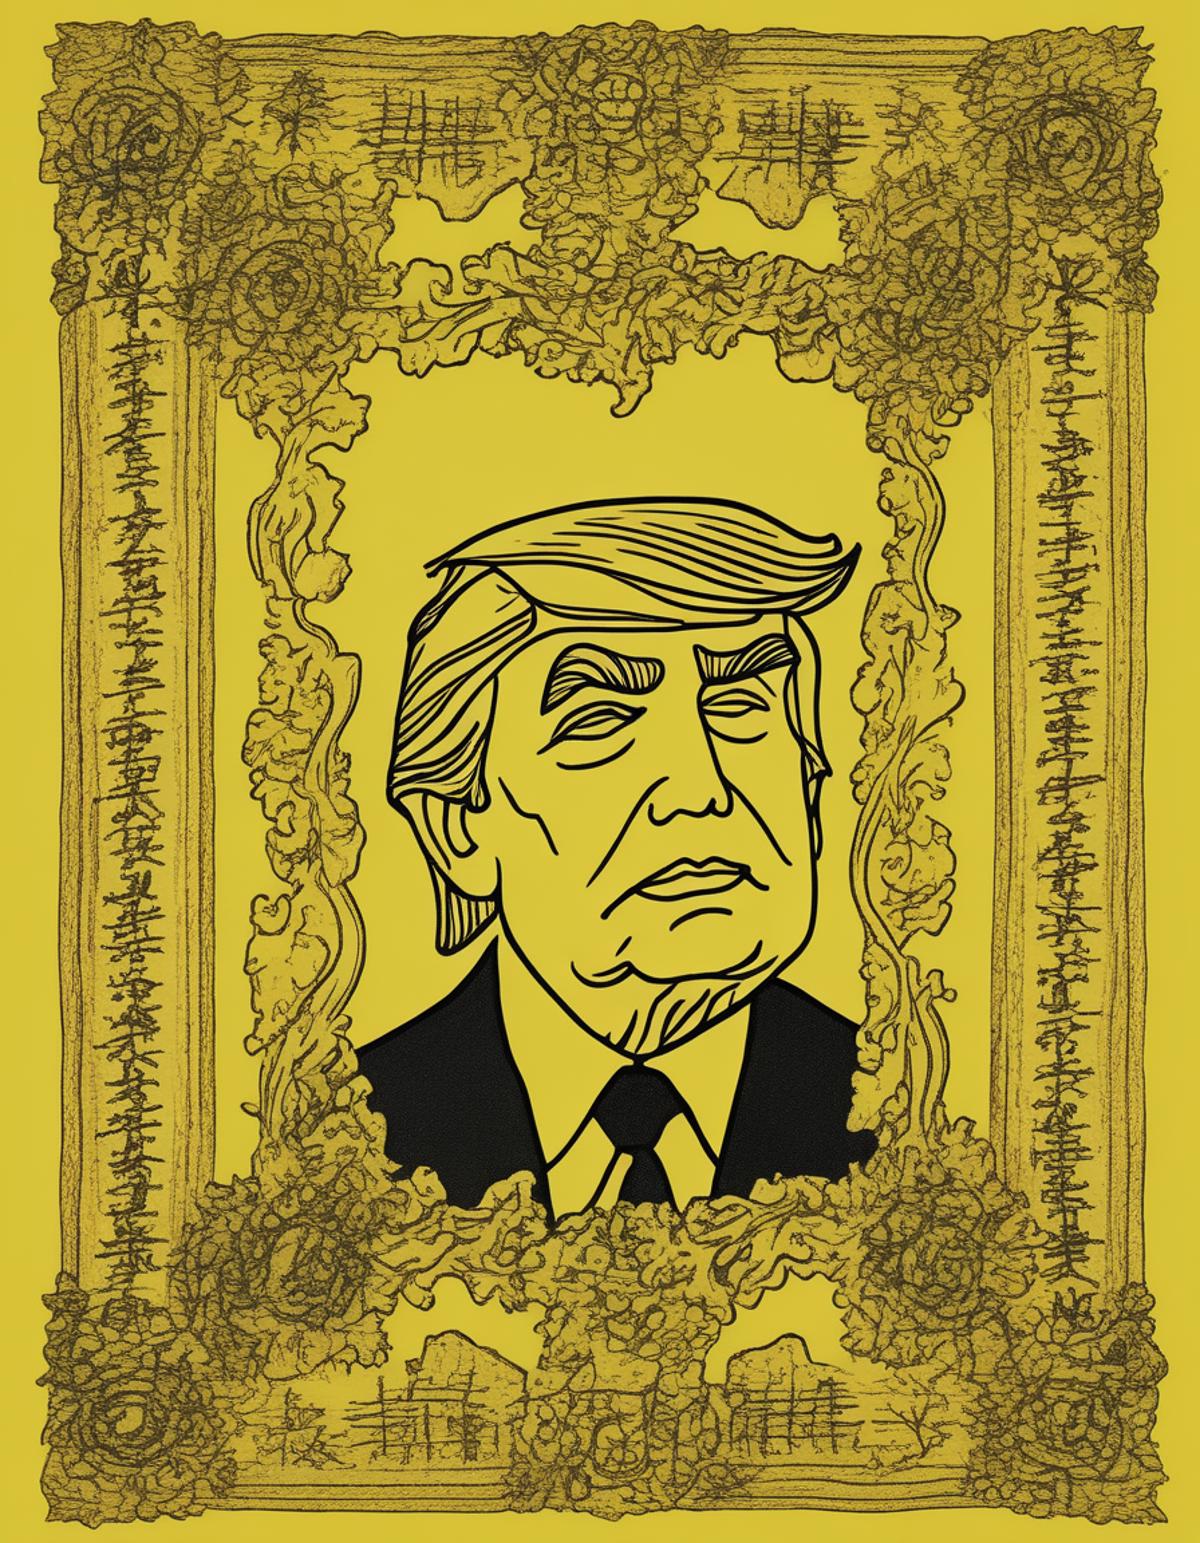 A photorealistic image of a portrait of Donald Trump printed on a yellow piece of paper. The paper should look aged, with ...